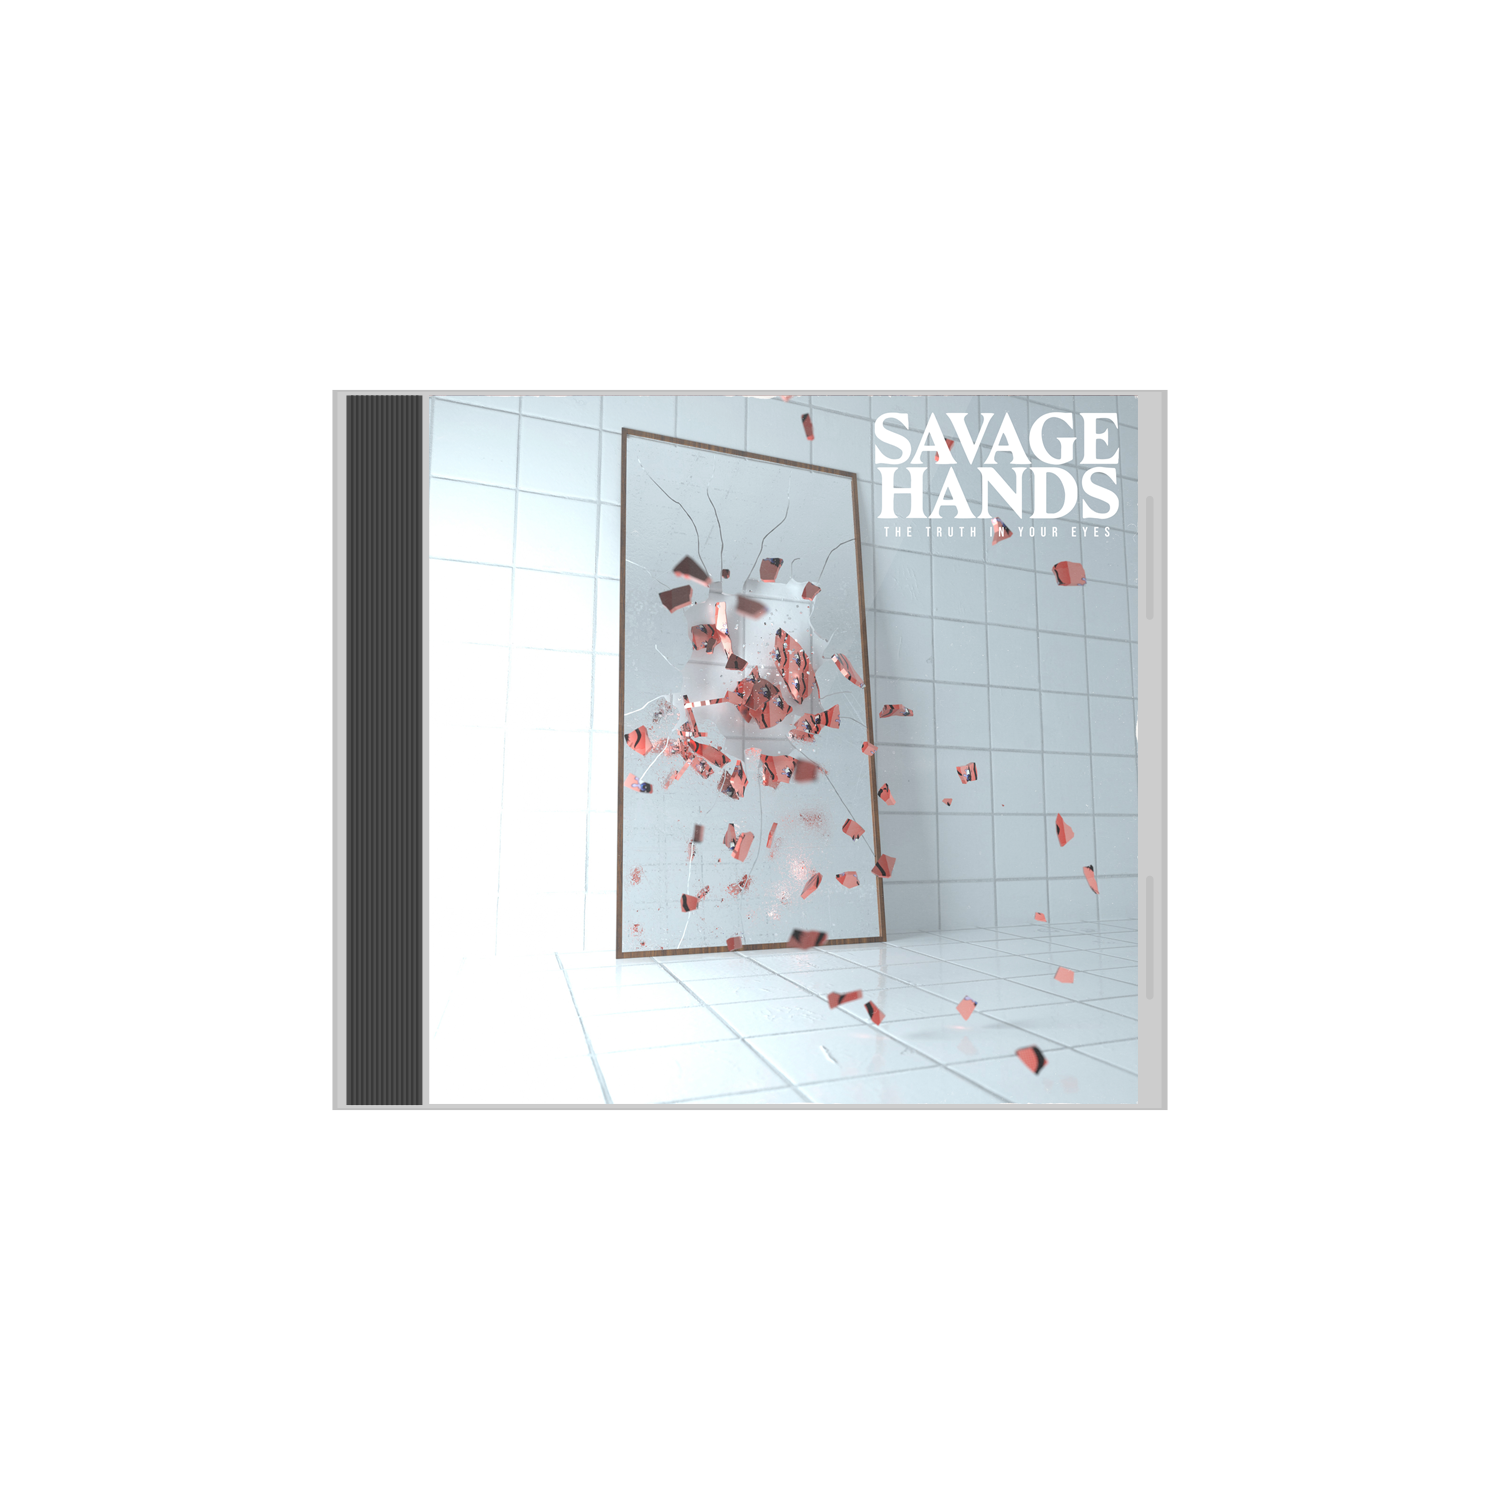 Savage Hands - 'The Truth In Your Eyes' CD